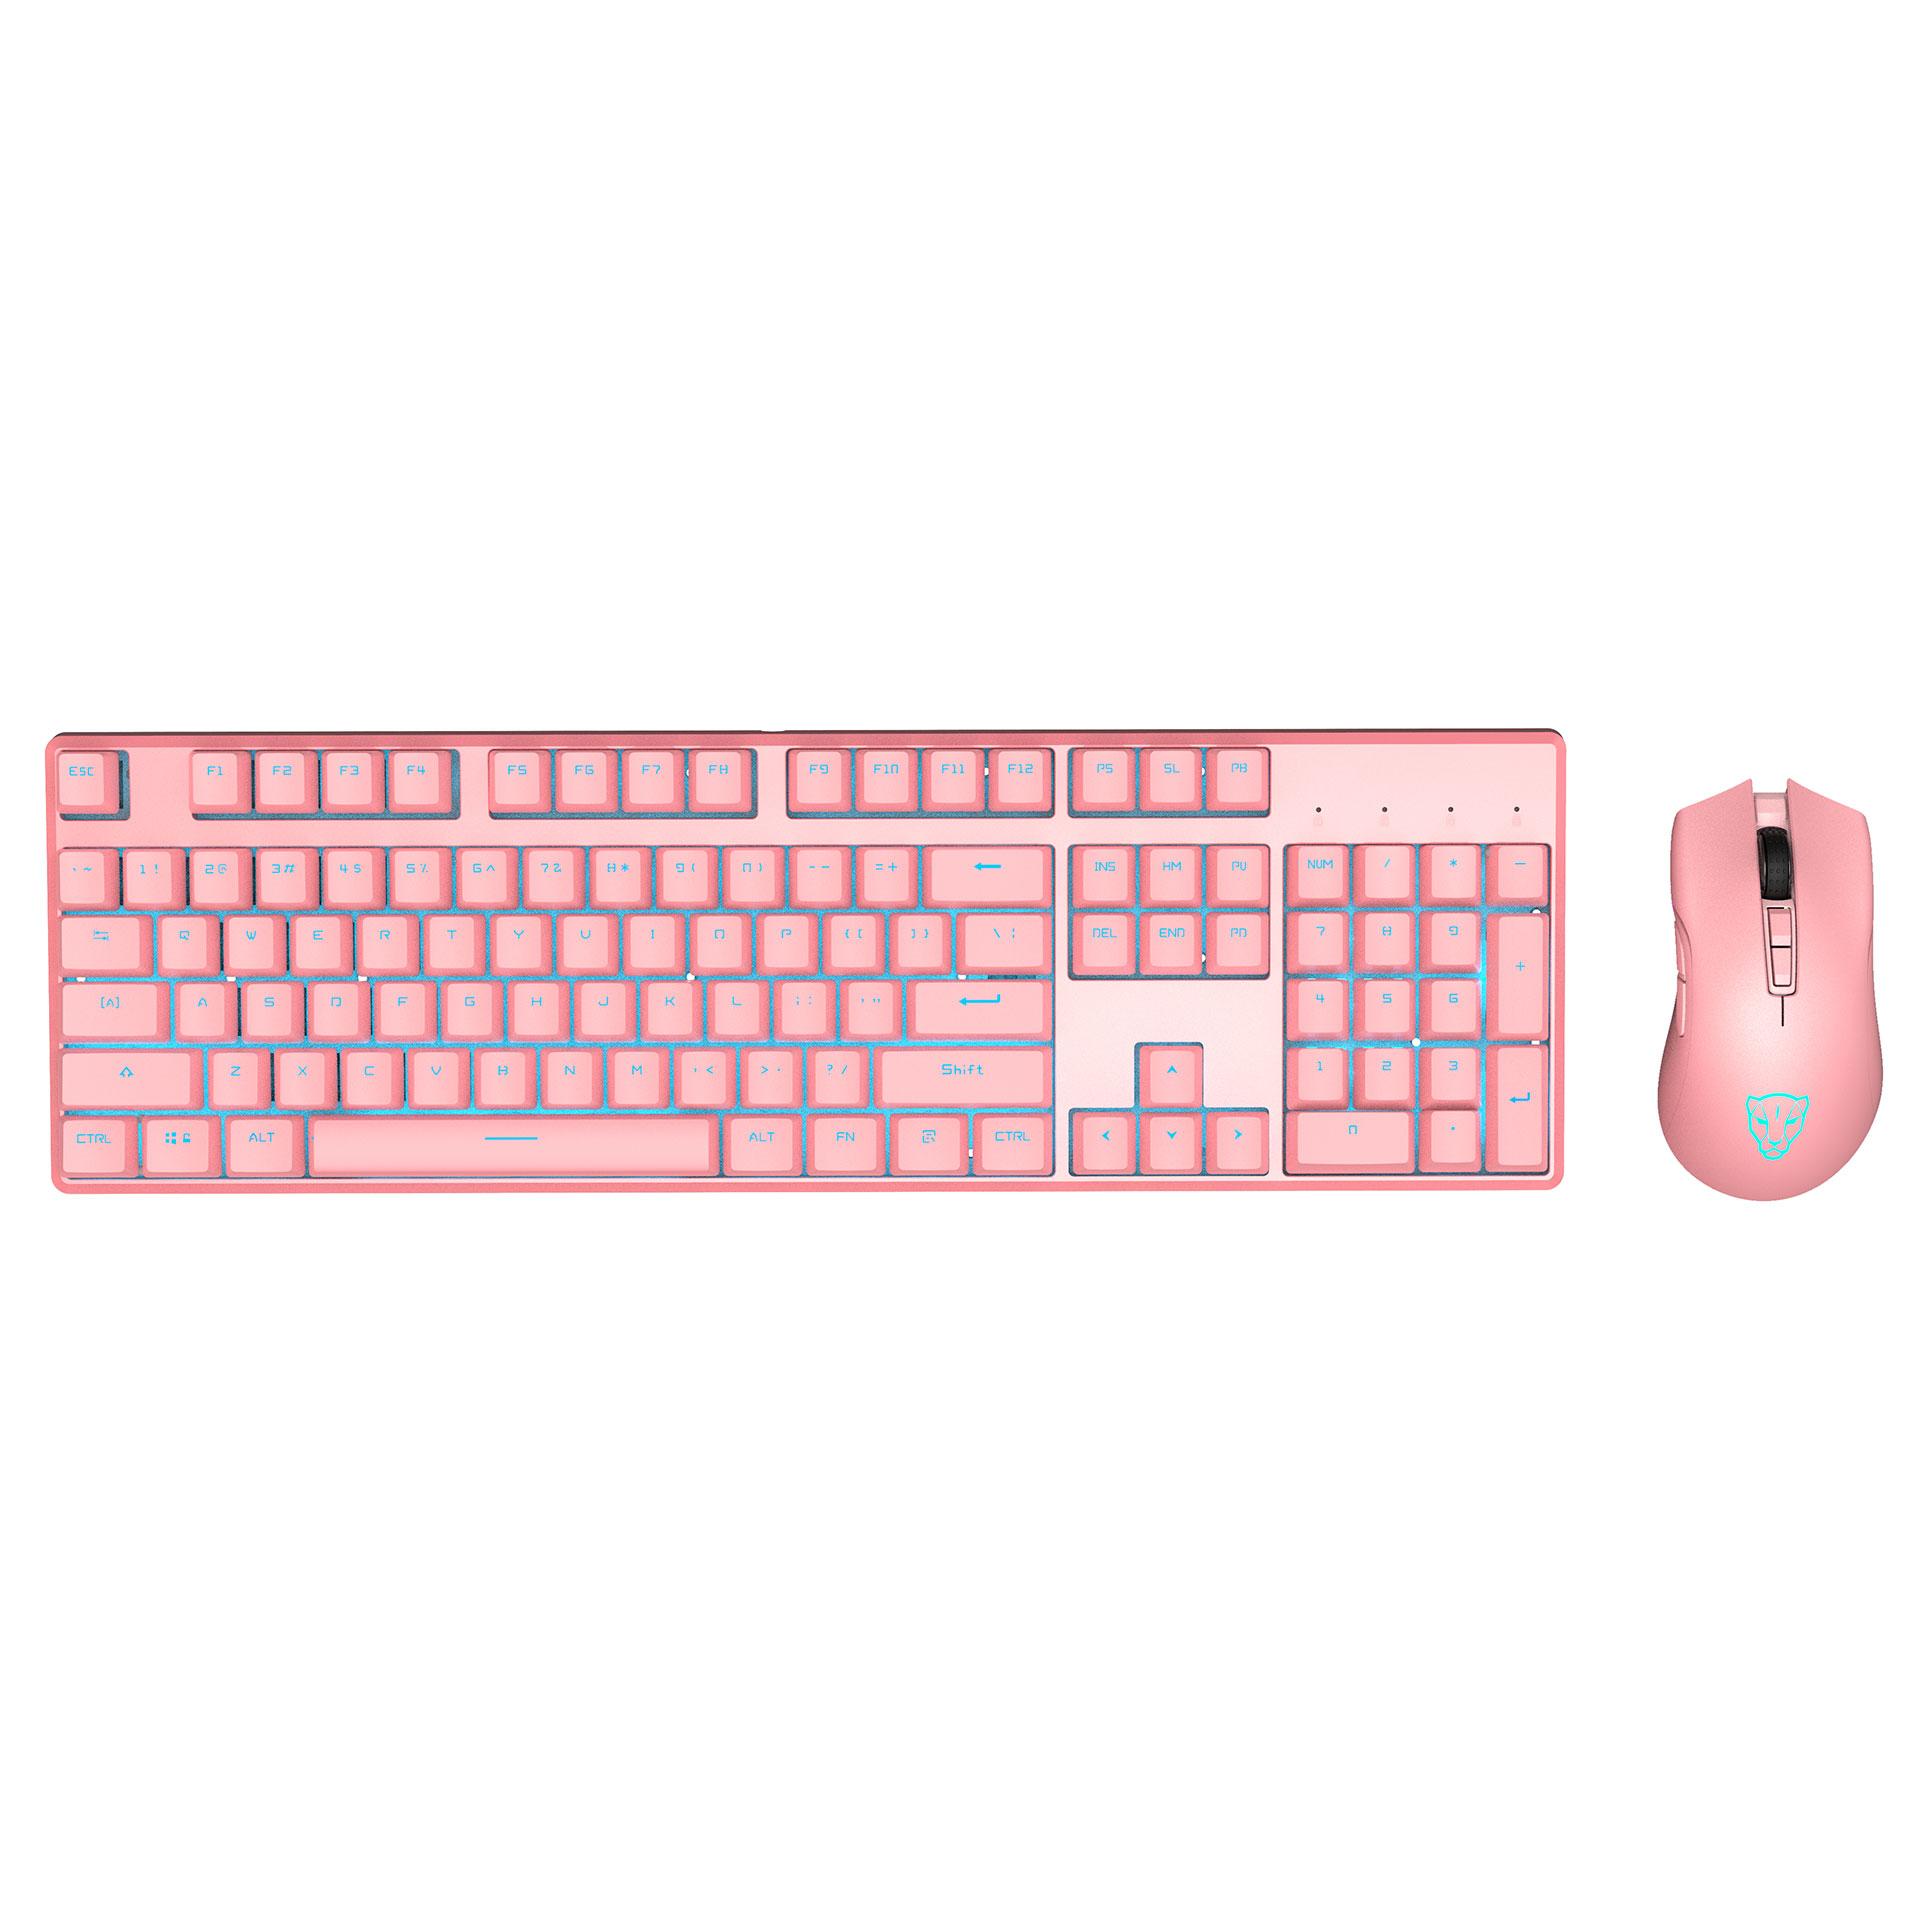 Motospeed CK700 Zeus Optical switch, Ice blue backlit Keyboard Mouse Combo-Pink color(Waterproof IP68)